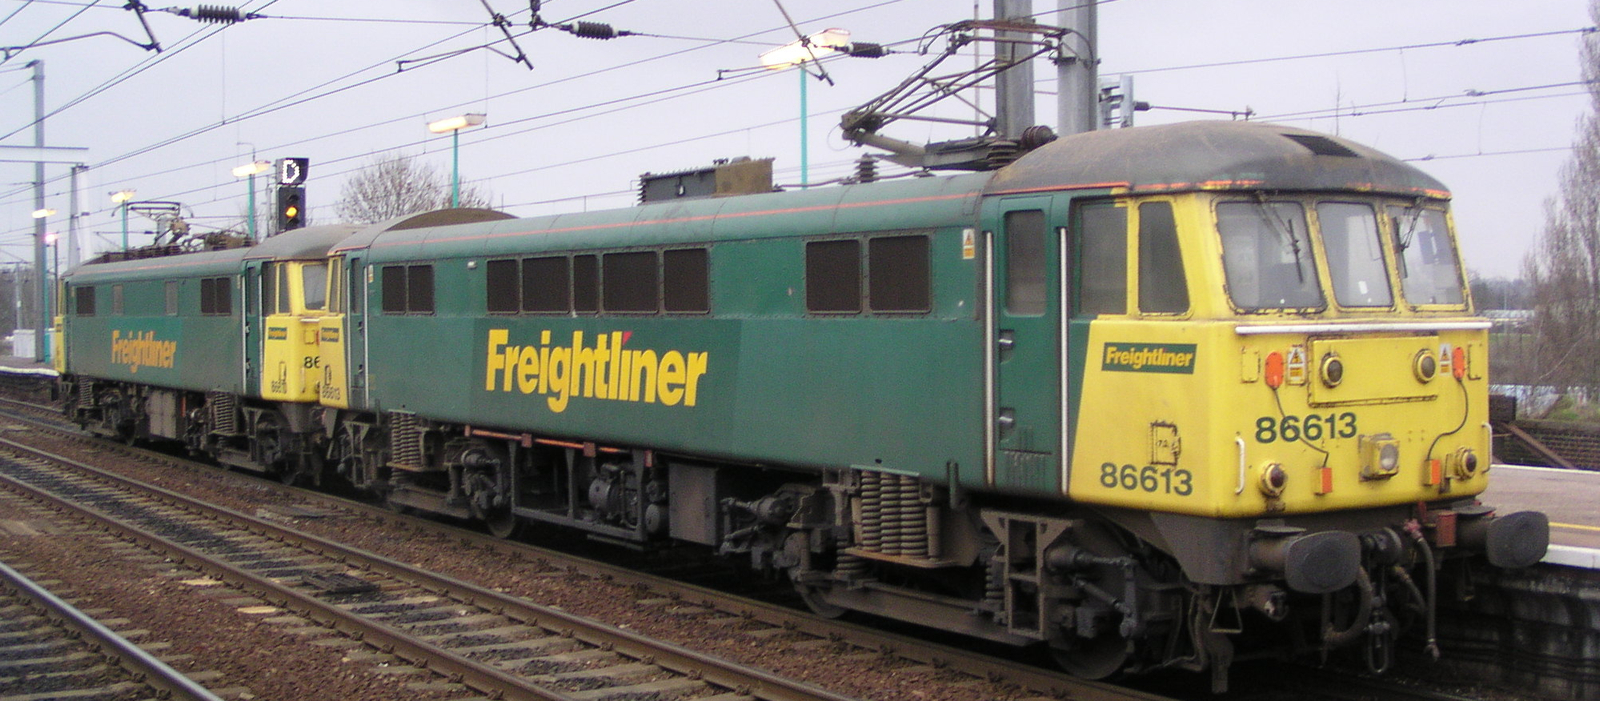 Freightliner 86613 and 86610 in September 2004 at Ipswich